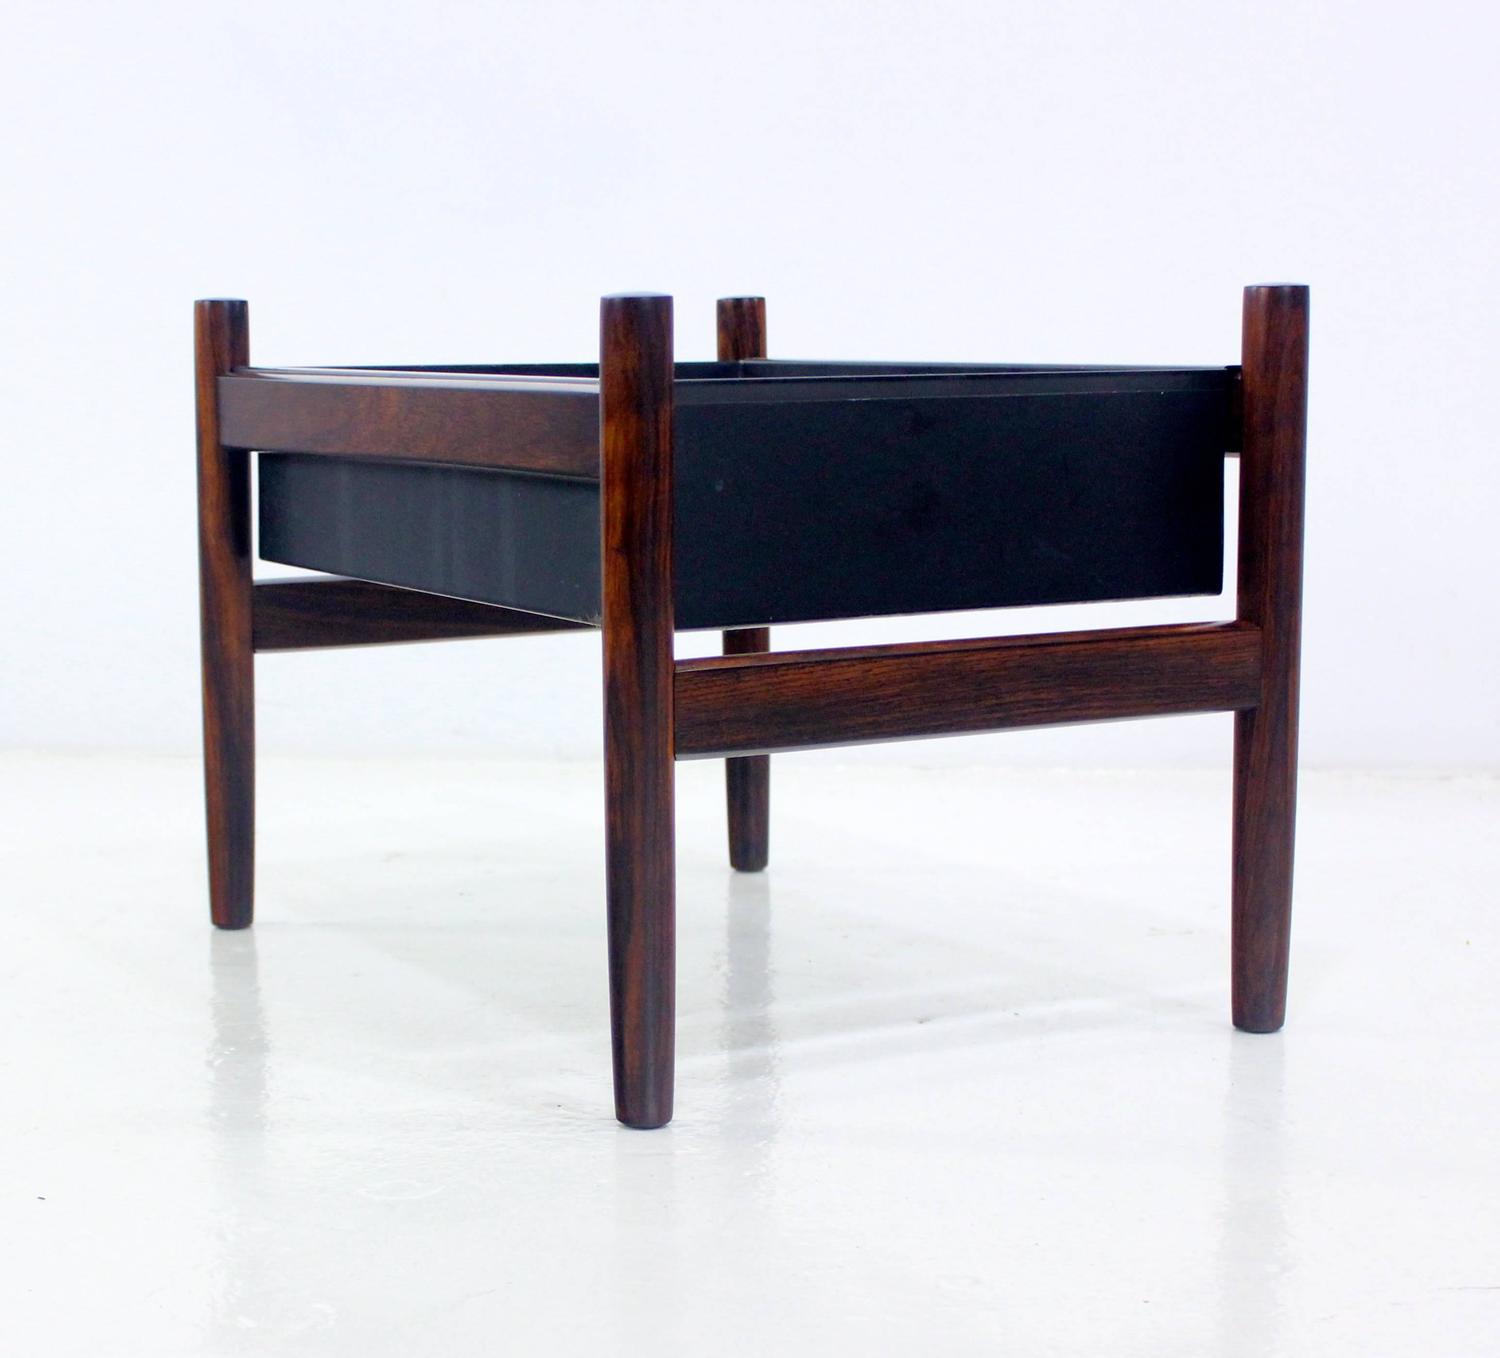 Pair of Danish Modern Rosewood Planters For Sale at 1stdibs